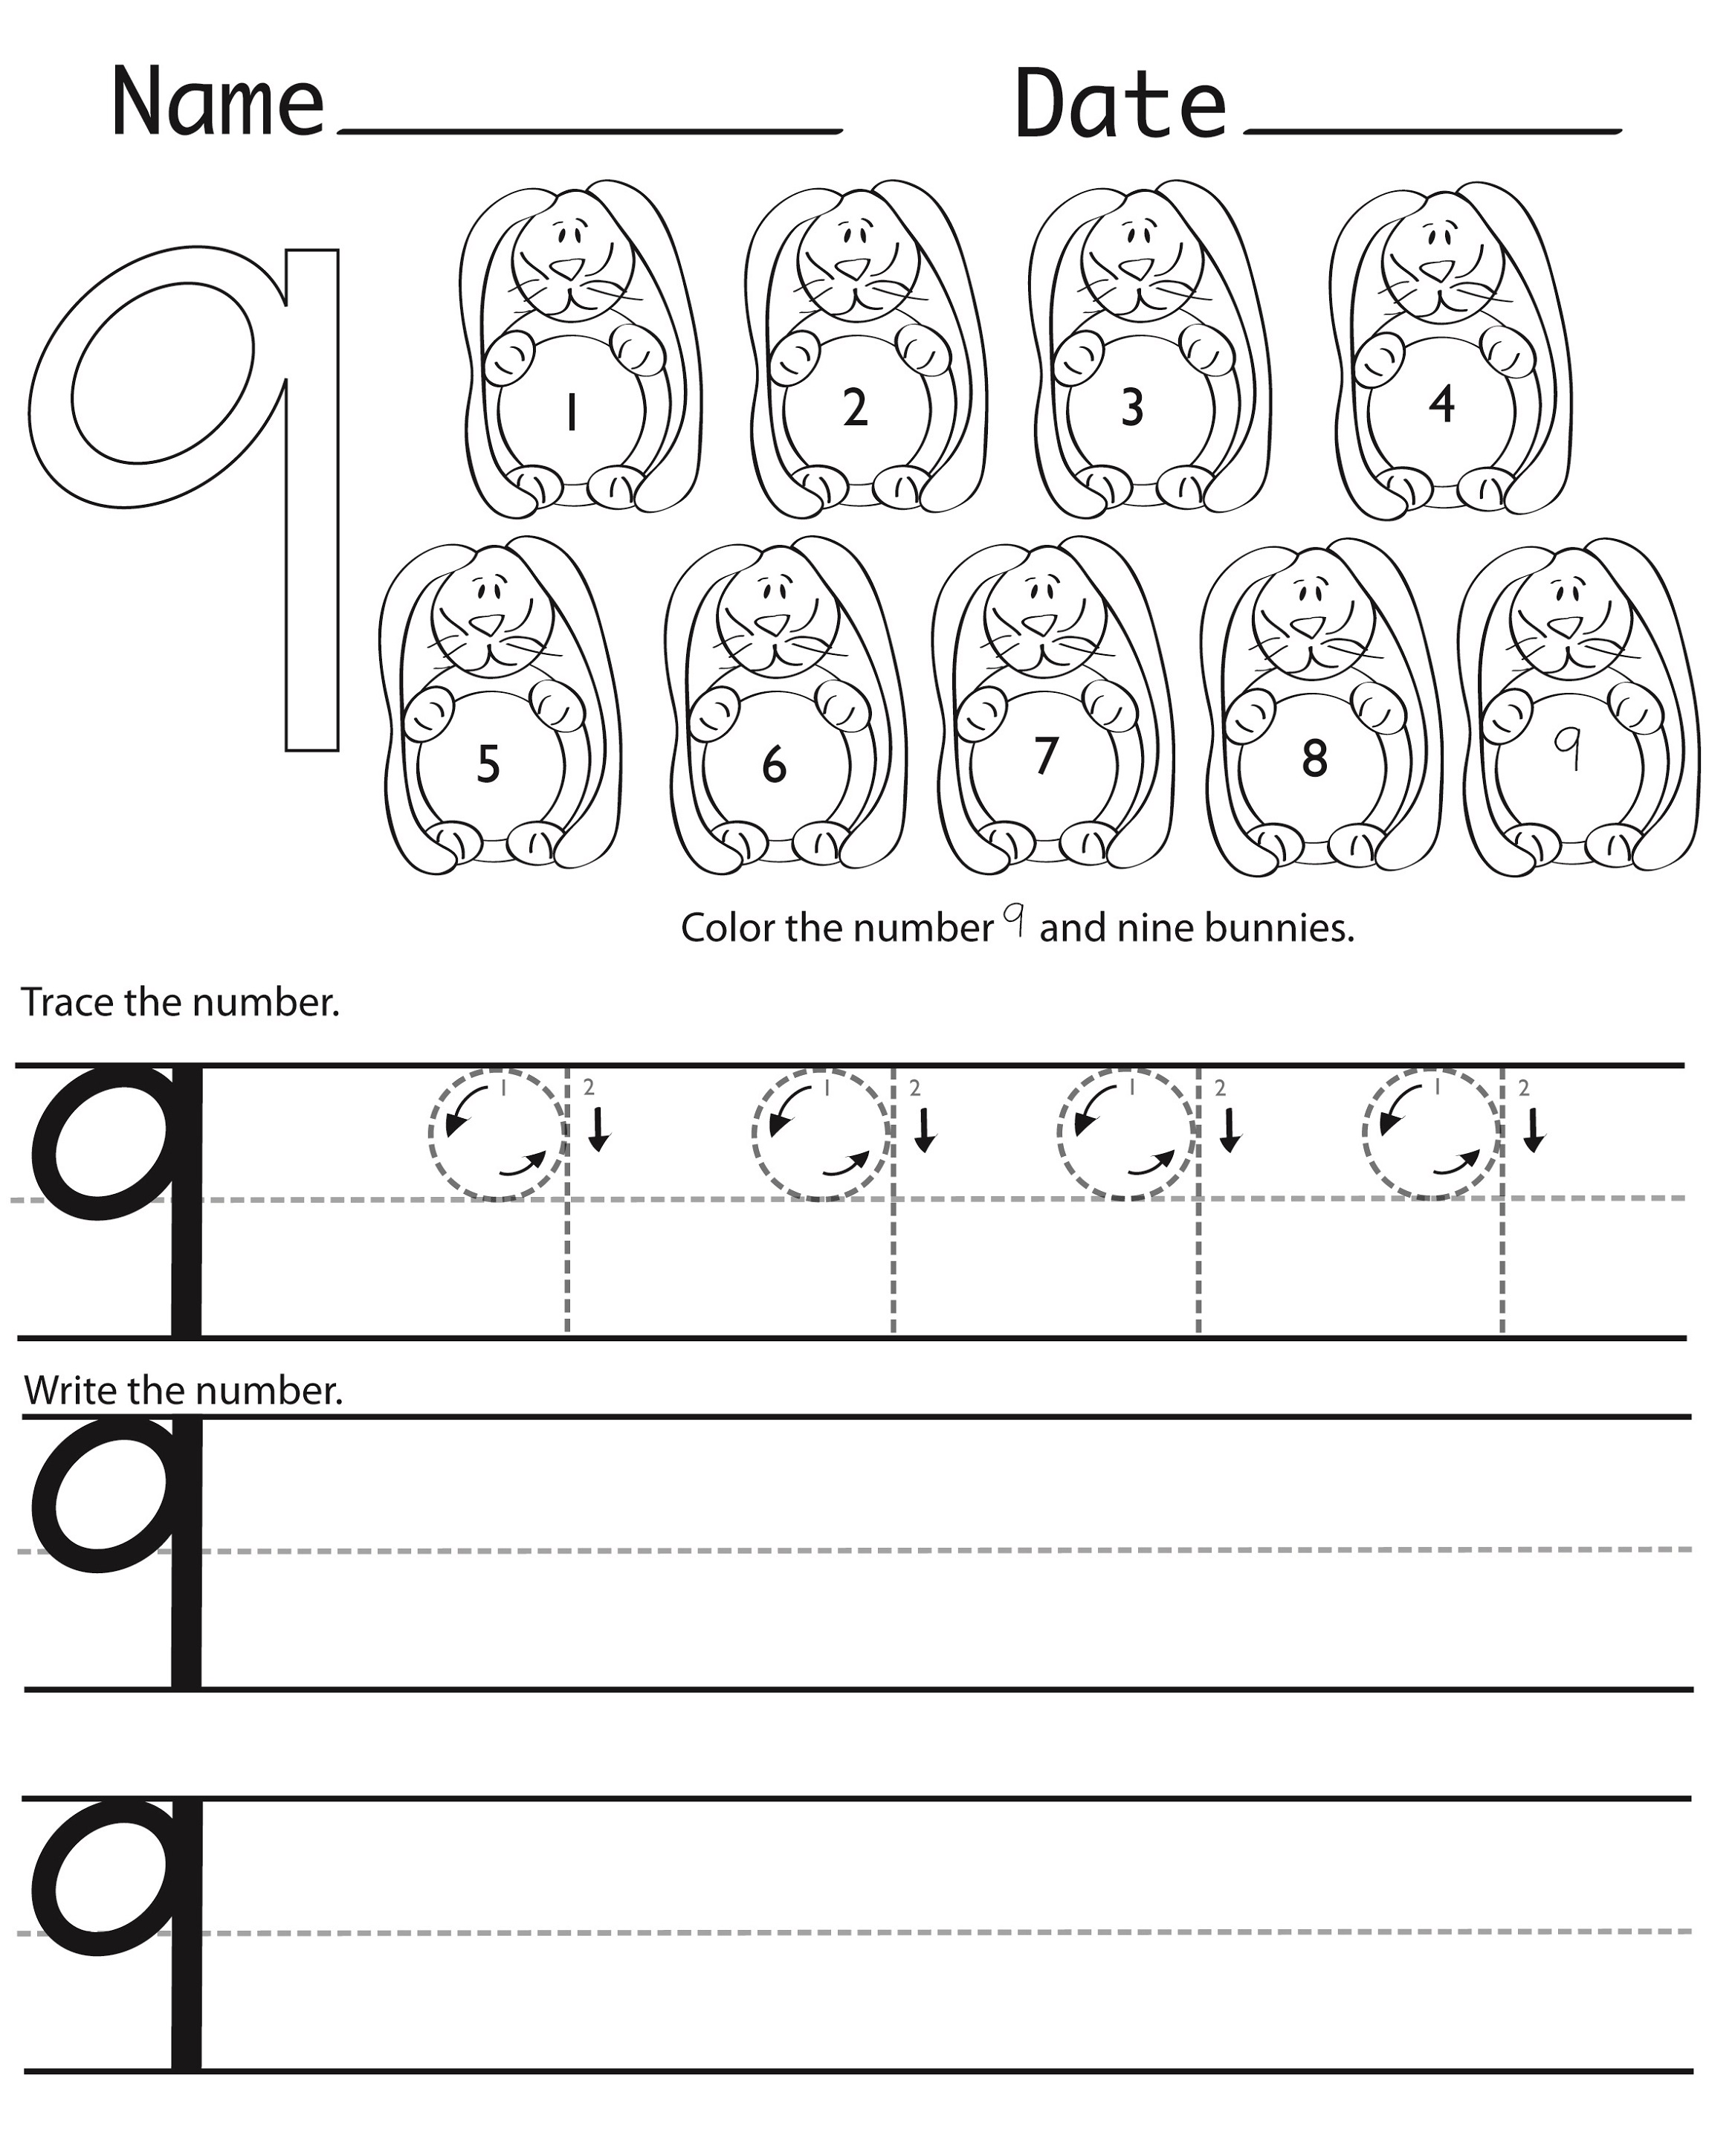 worksheets-for-practice-writing-numbers-1-10-free-printable